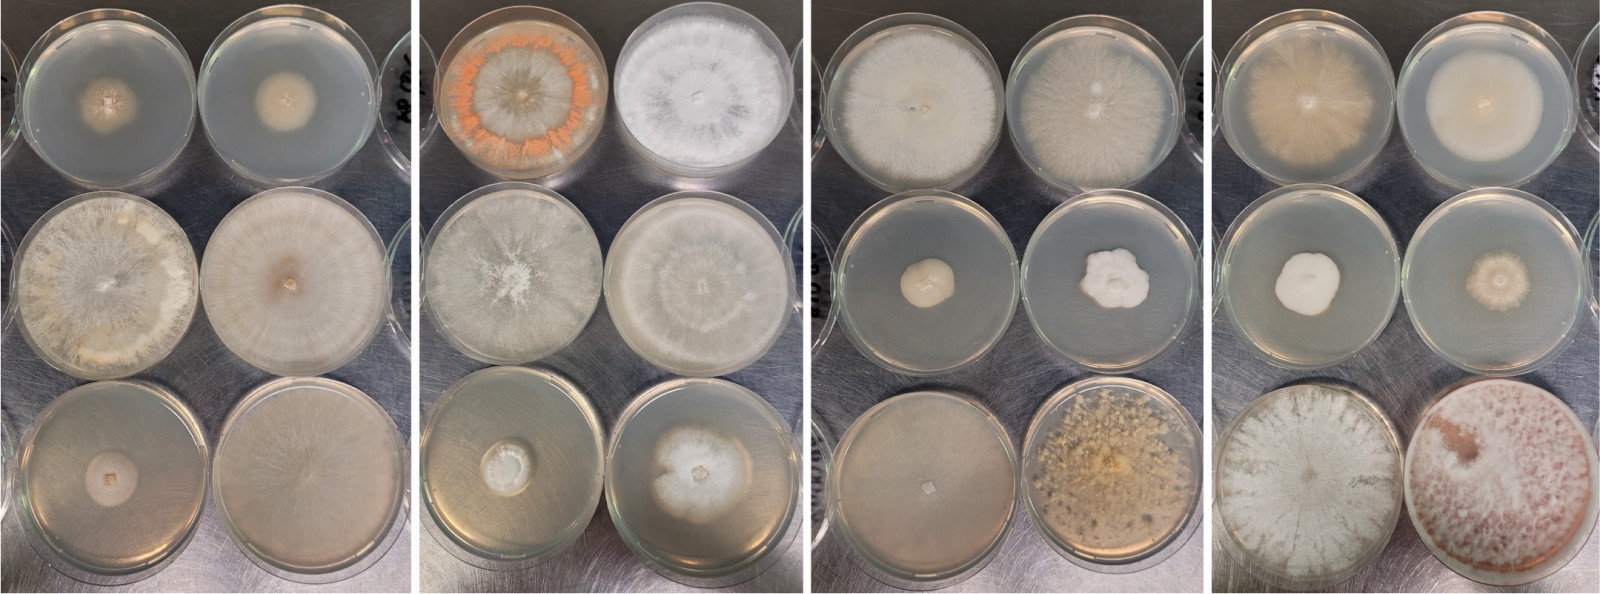 Mycelium of different types of mushroom fungi grown on dishes with a nutrient medium, a variety of color and structure.